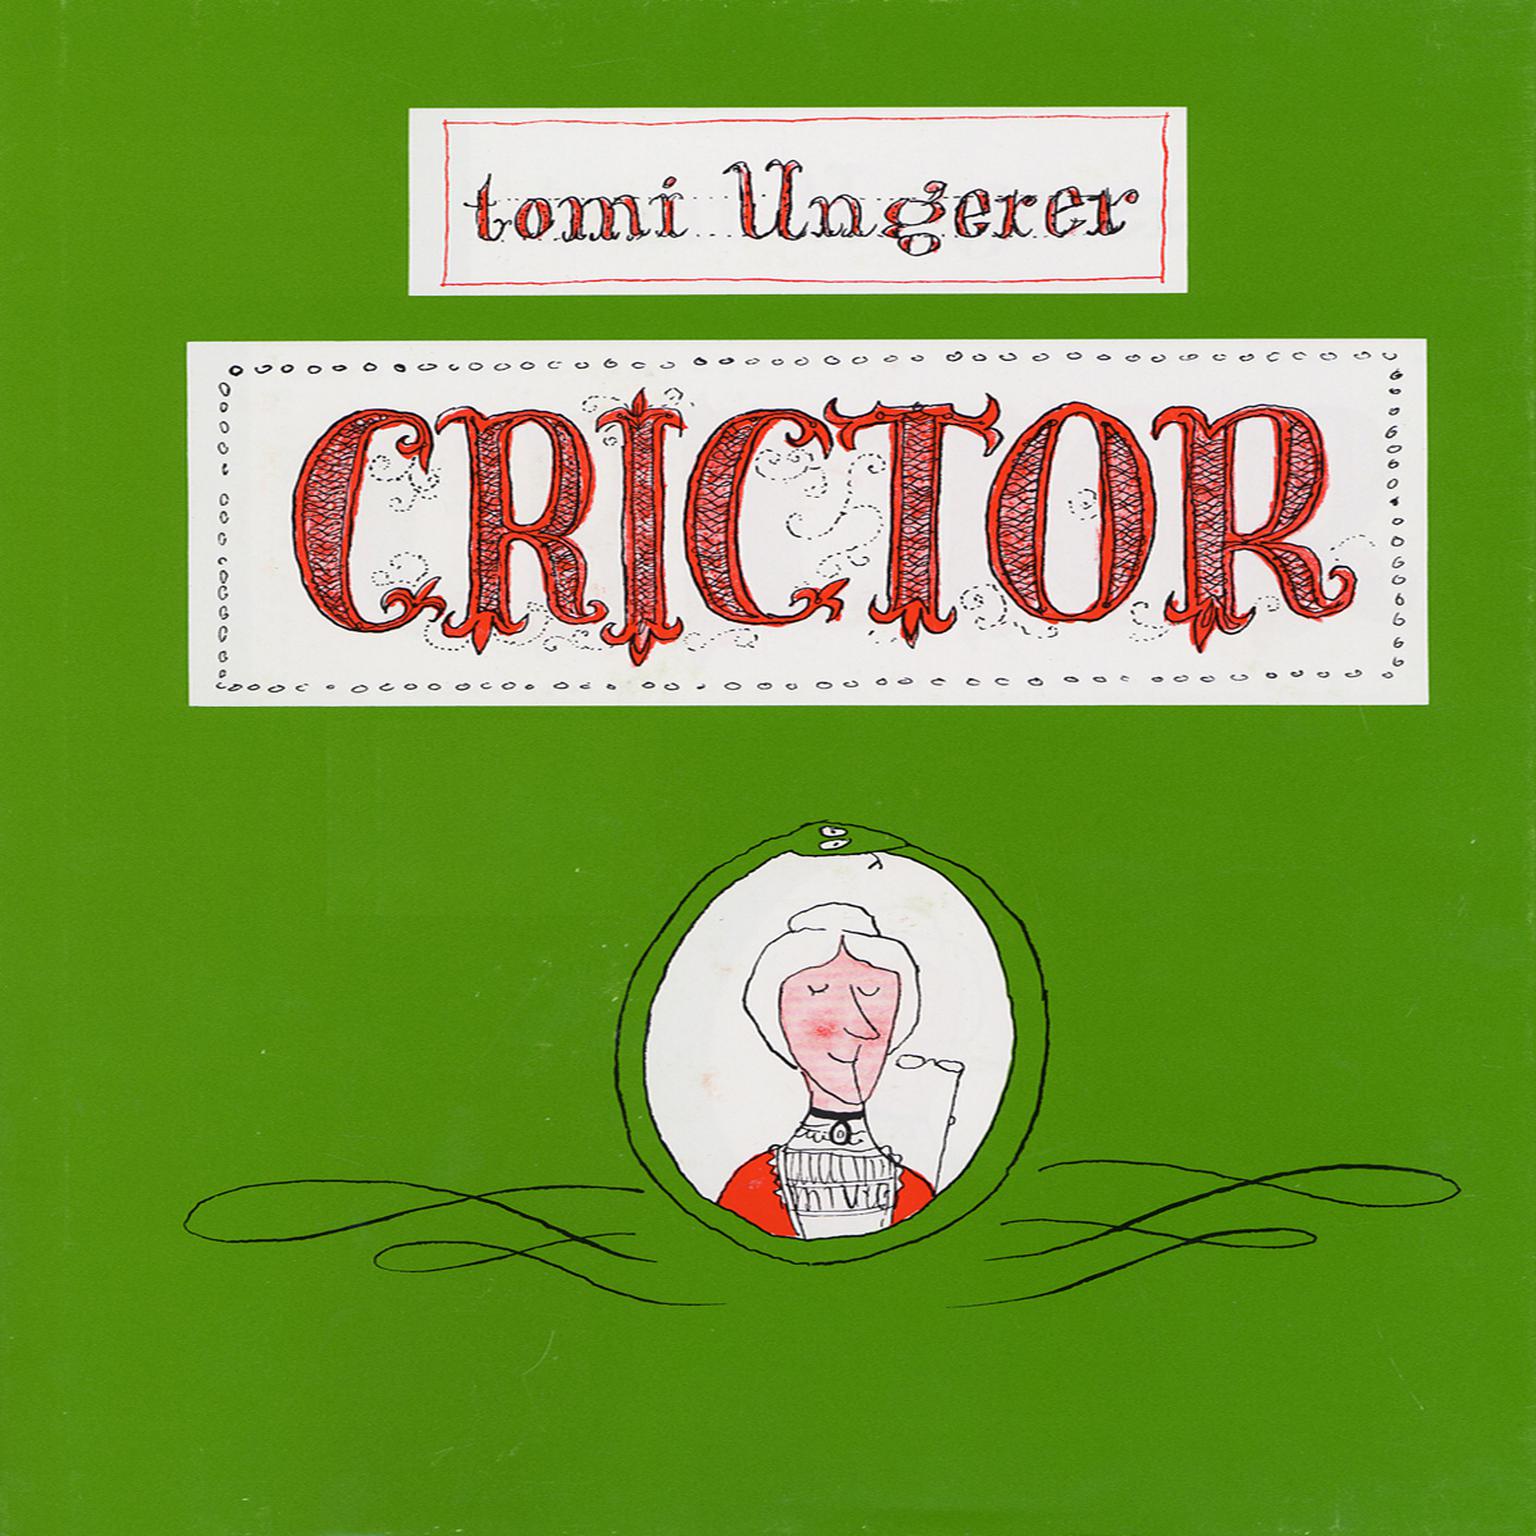 Crictor Audiobook, by Tomi Ungerer